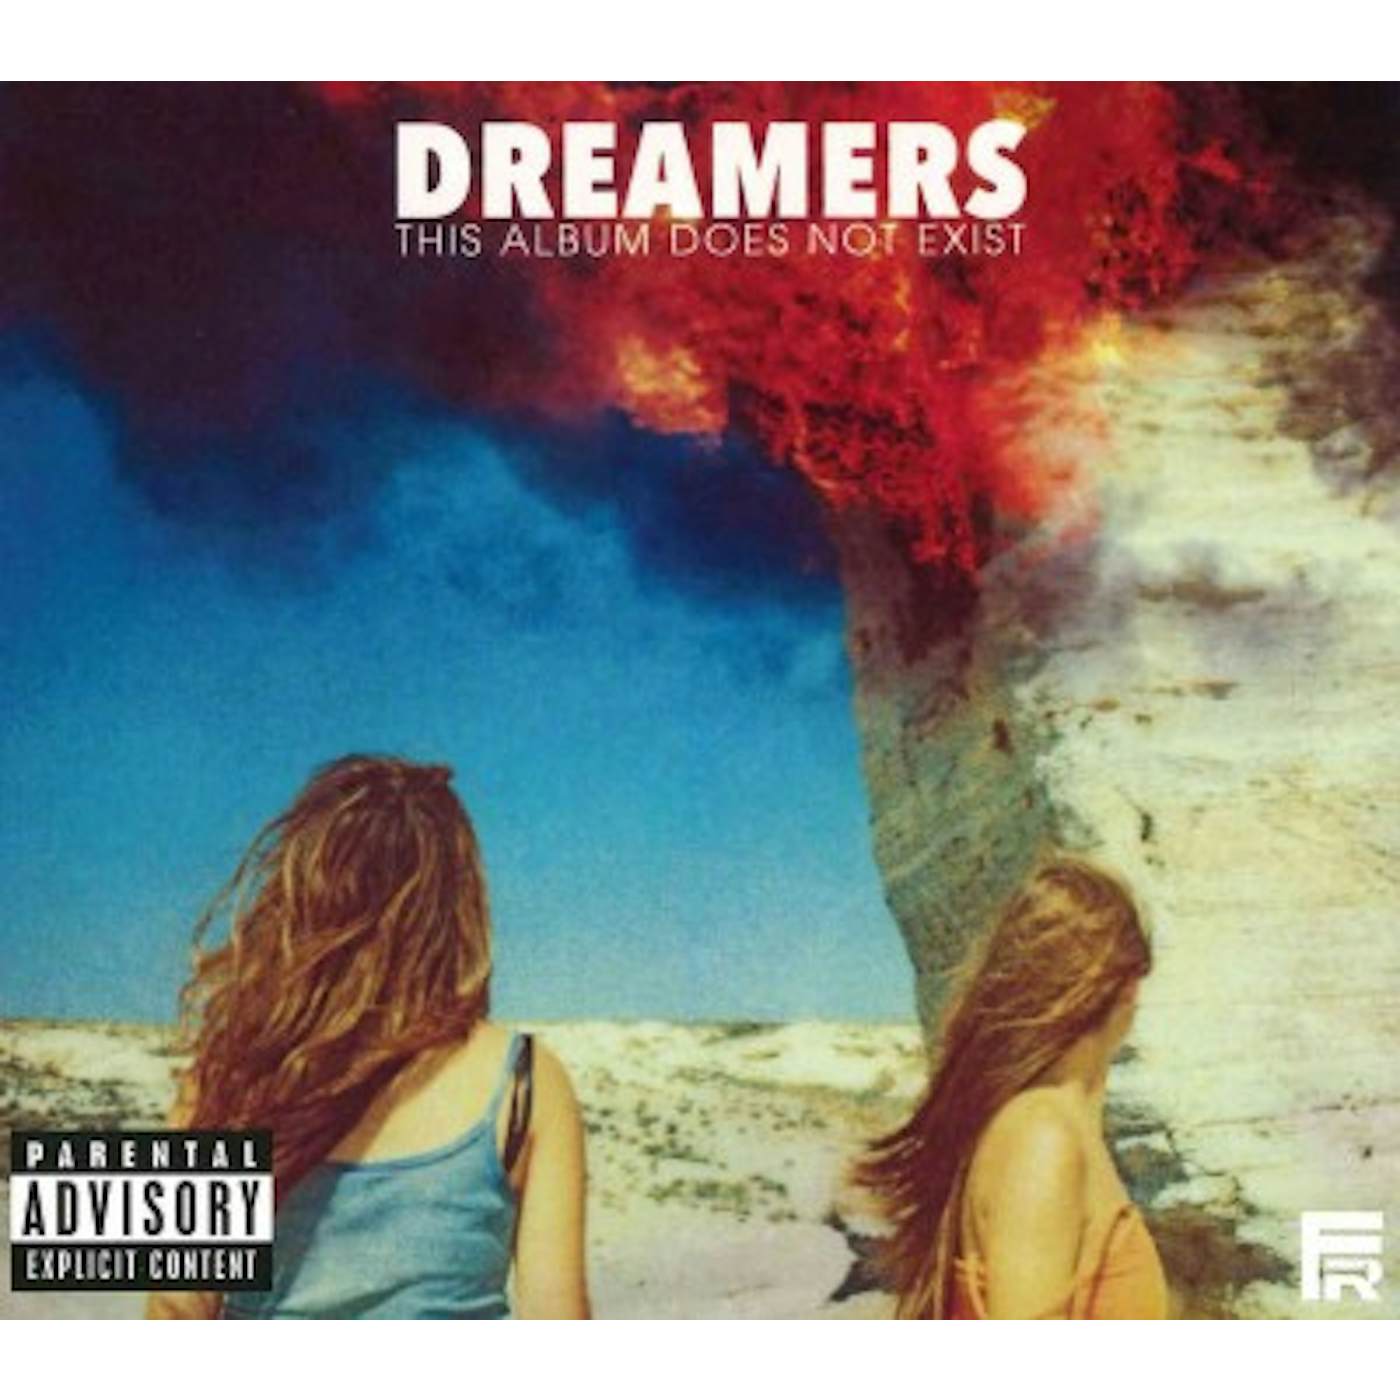 DREAMERS This Album Does Not Exist CD